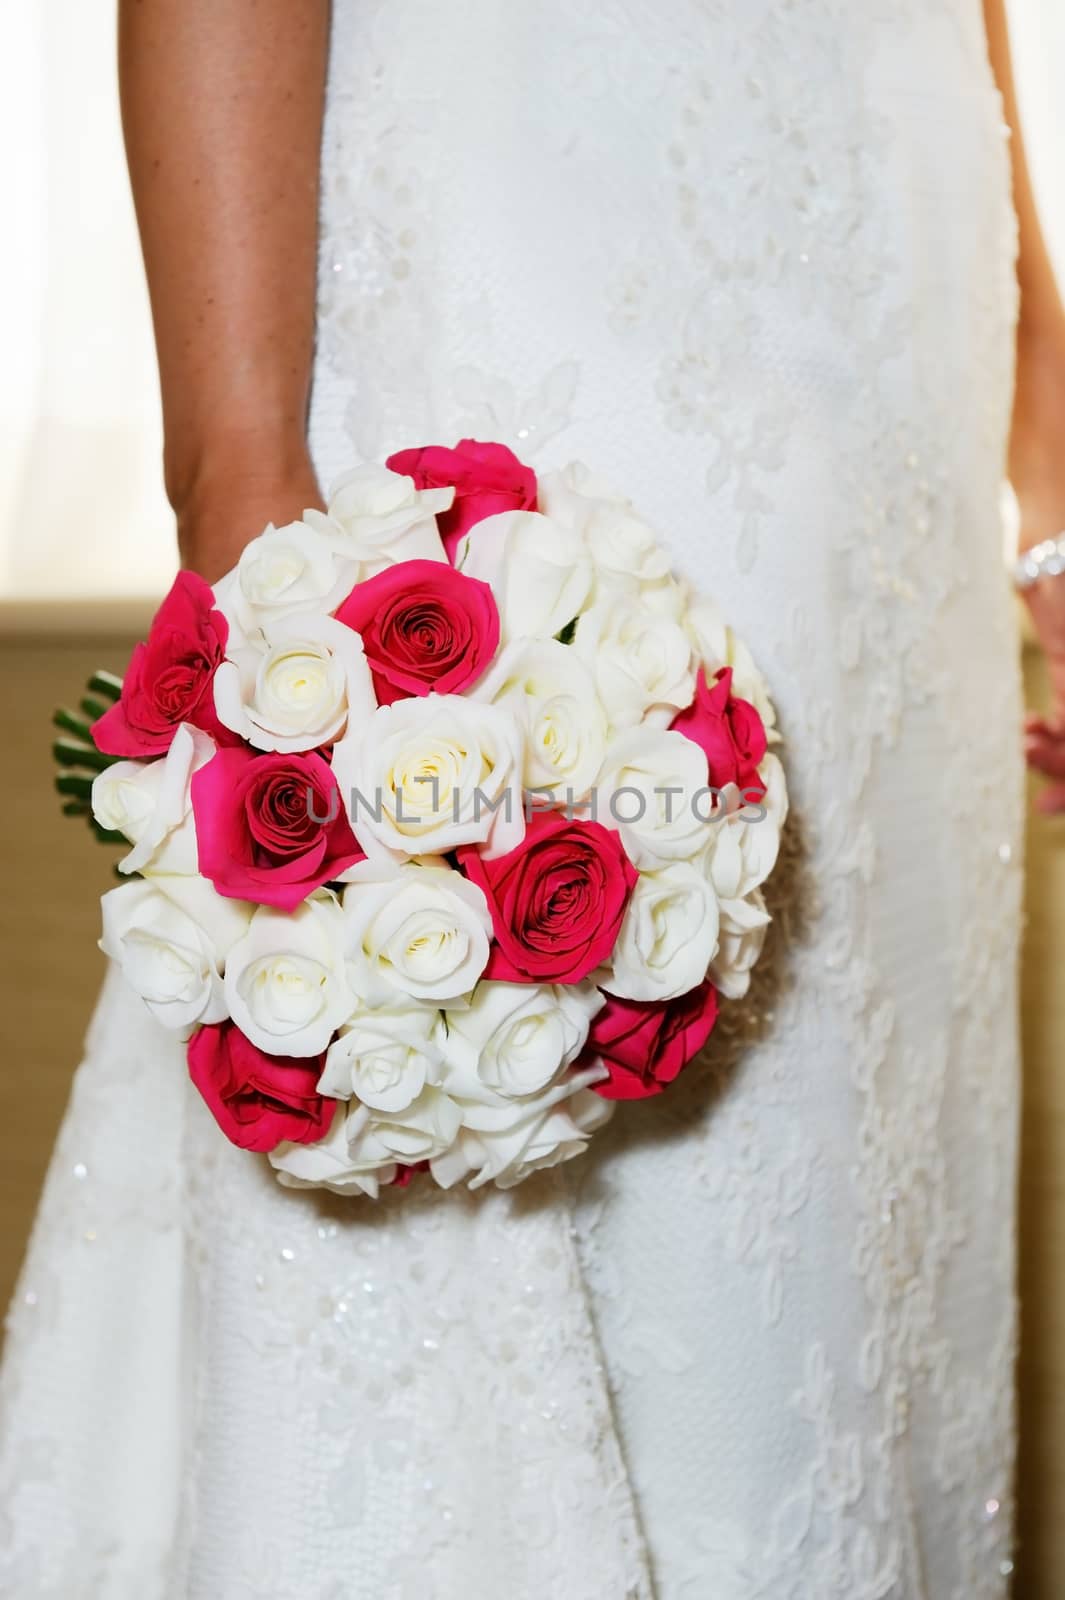 Closeup of brides bouquet of red and white flowers and dress detail